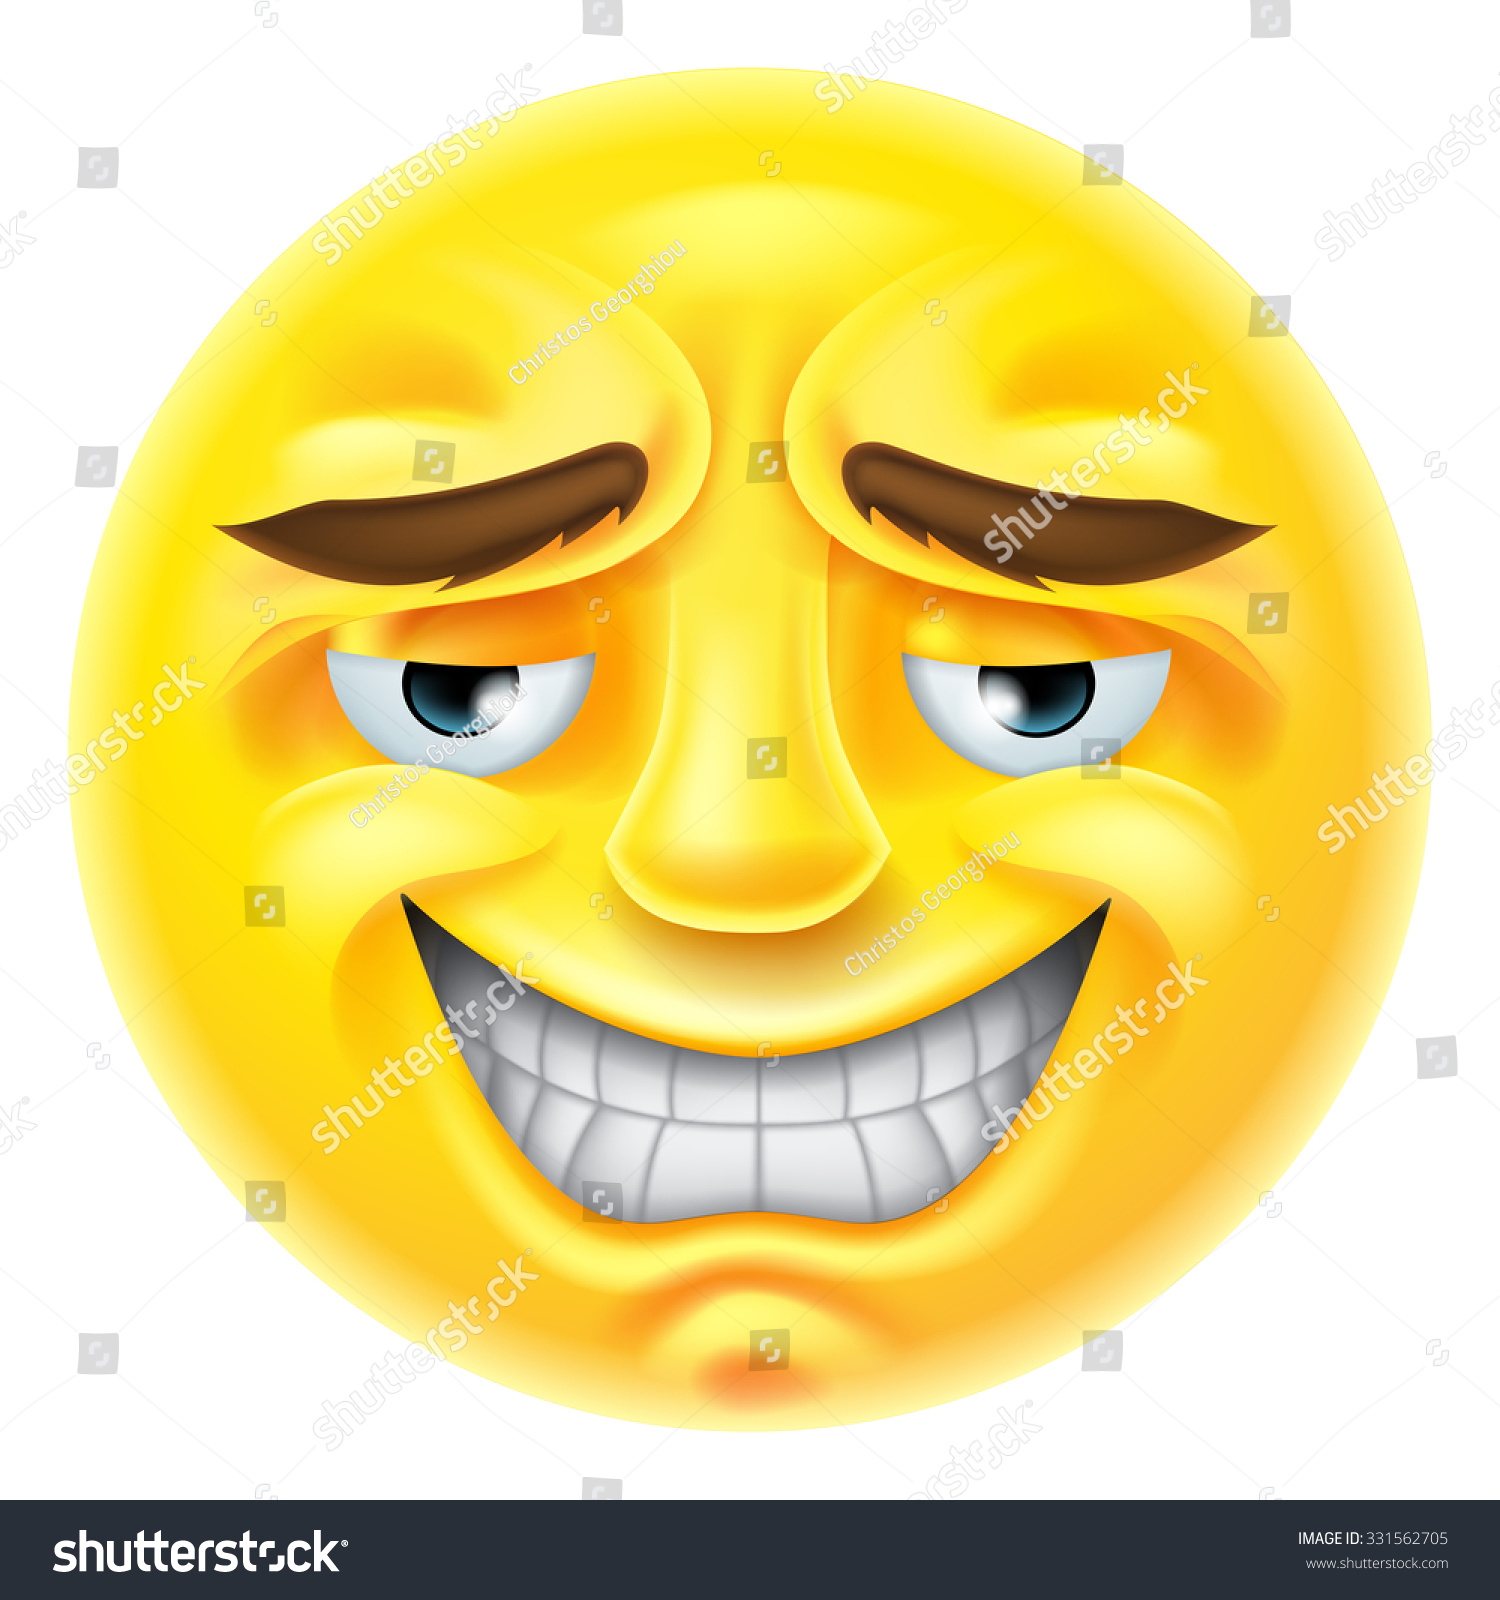 An Emoji Emoticon Character Smiling In An Embarrassed Or Unctuous Way ...